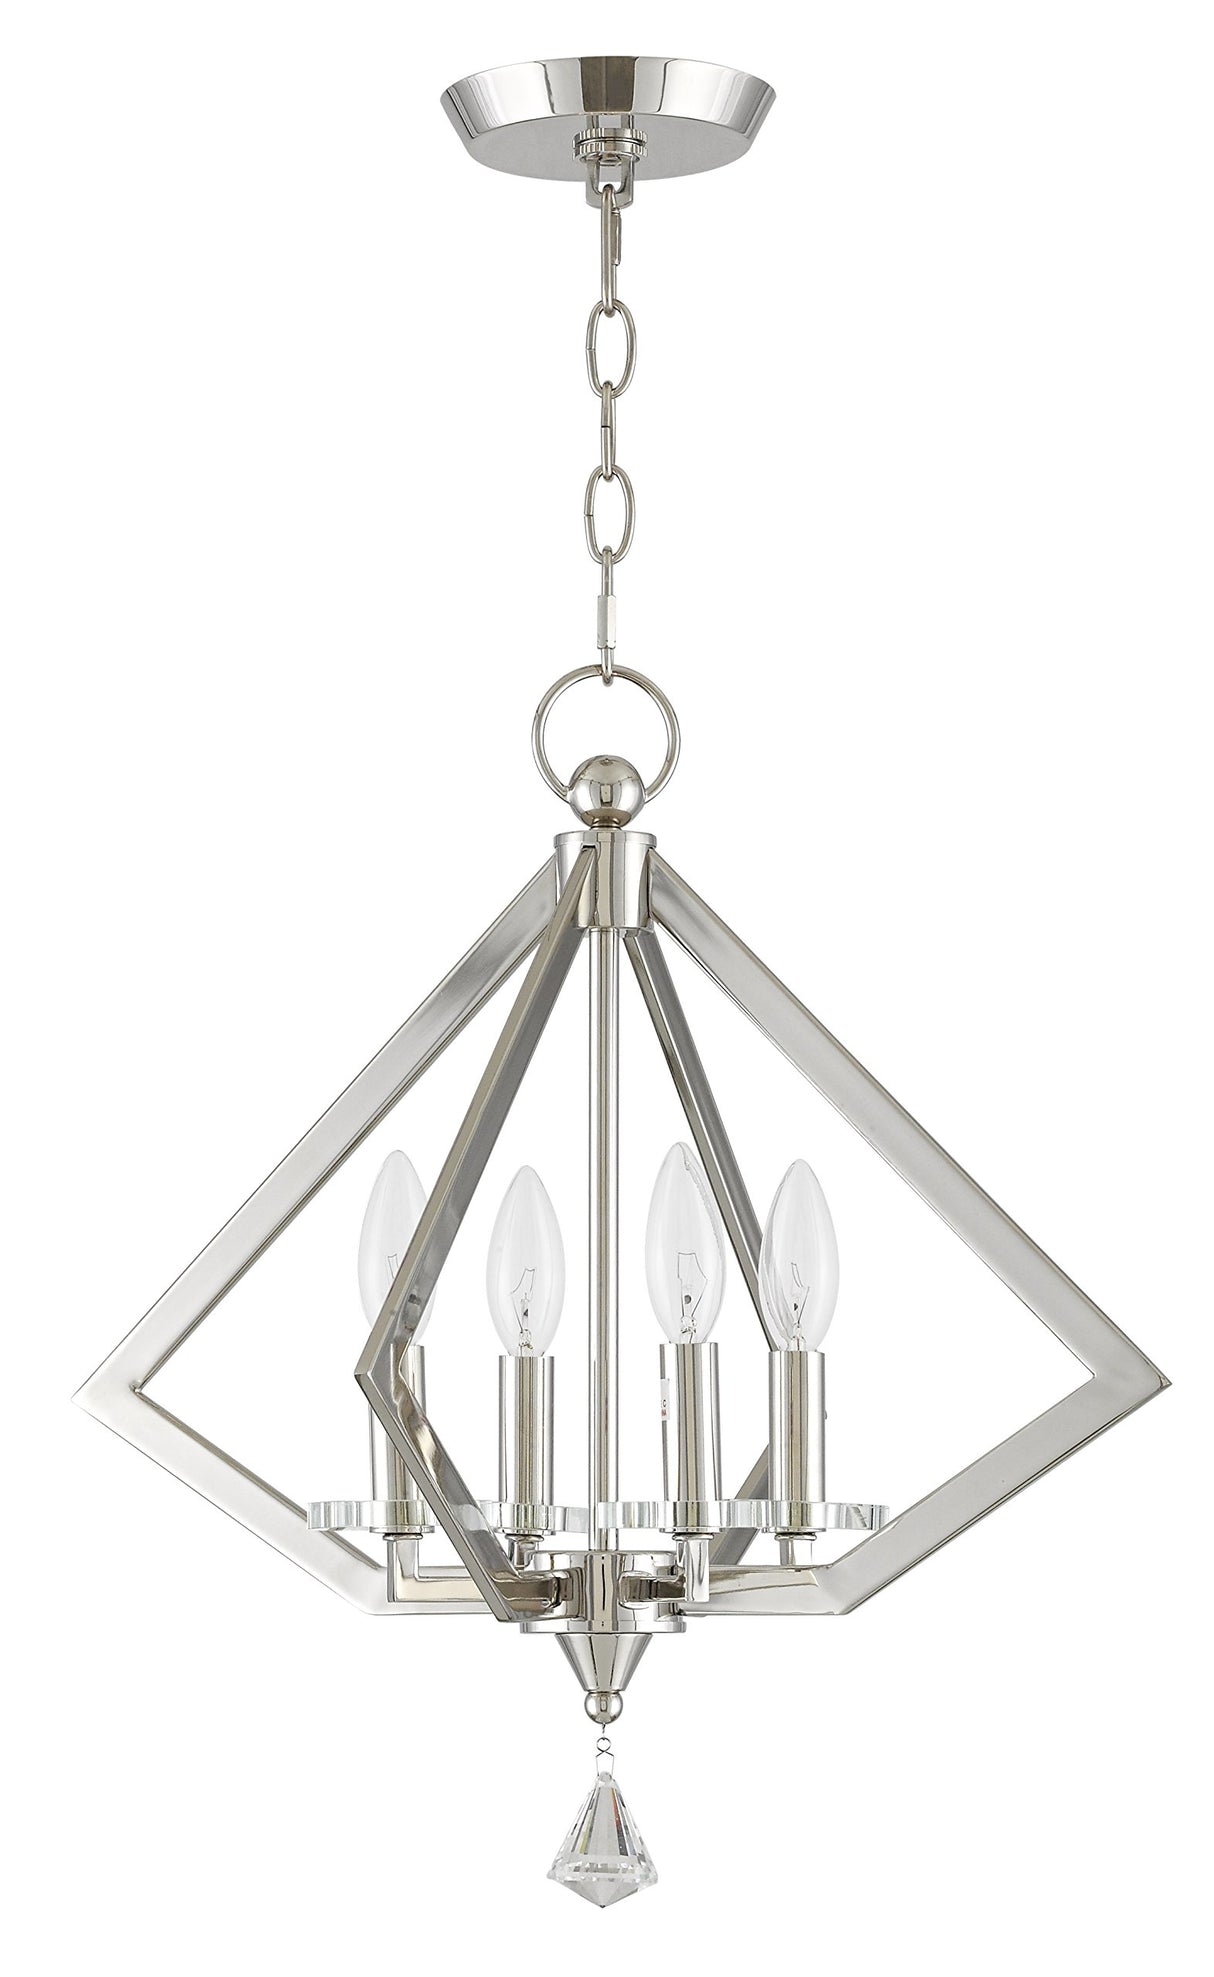 Livex Lighting 50664-35 Transitional Four Light Mini Chandelier from Diamond Collection in Polished Nickel Finish